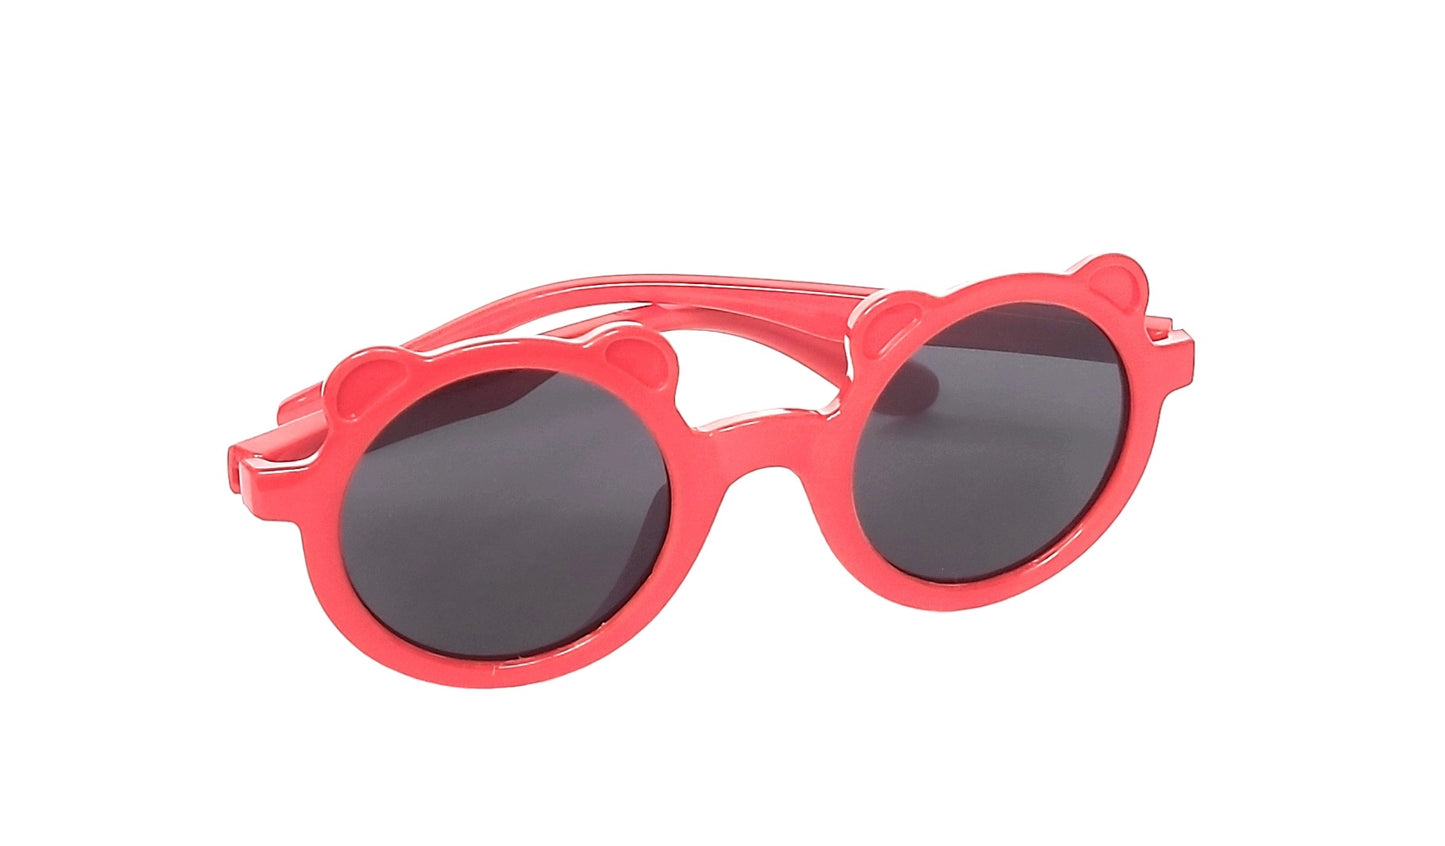 Kids polarized sunglasses for Kids Girls and Boys ( 3yrs to 8yrs ) – affaires-9005-Red